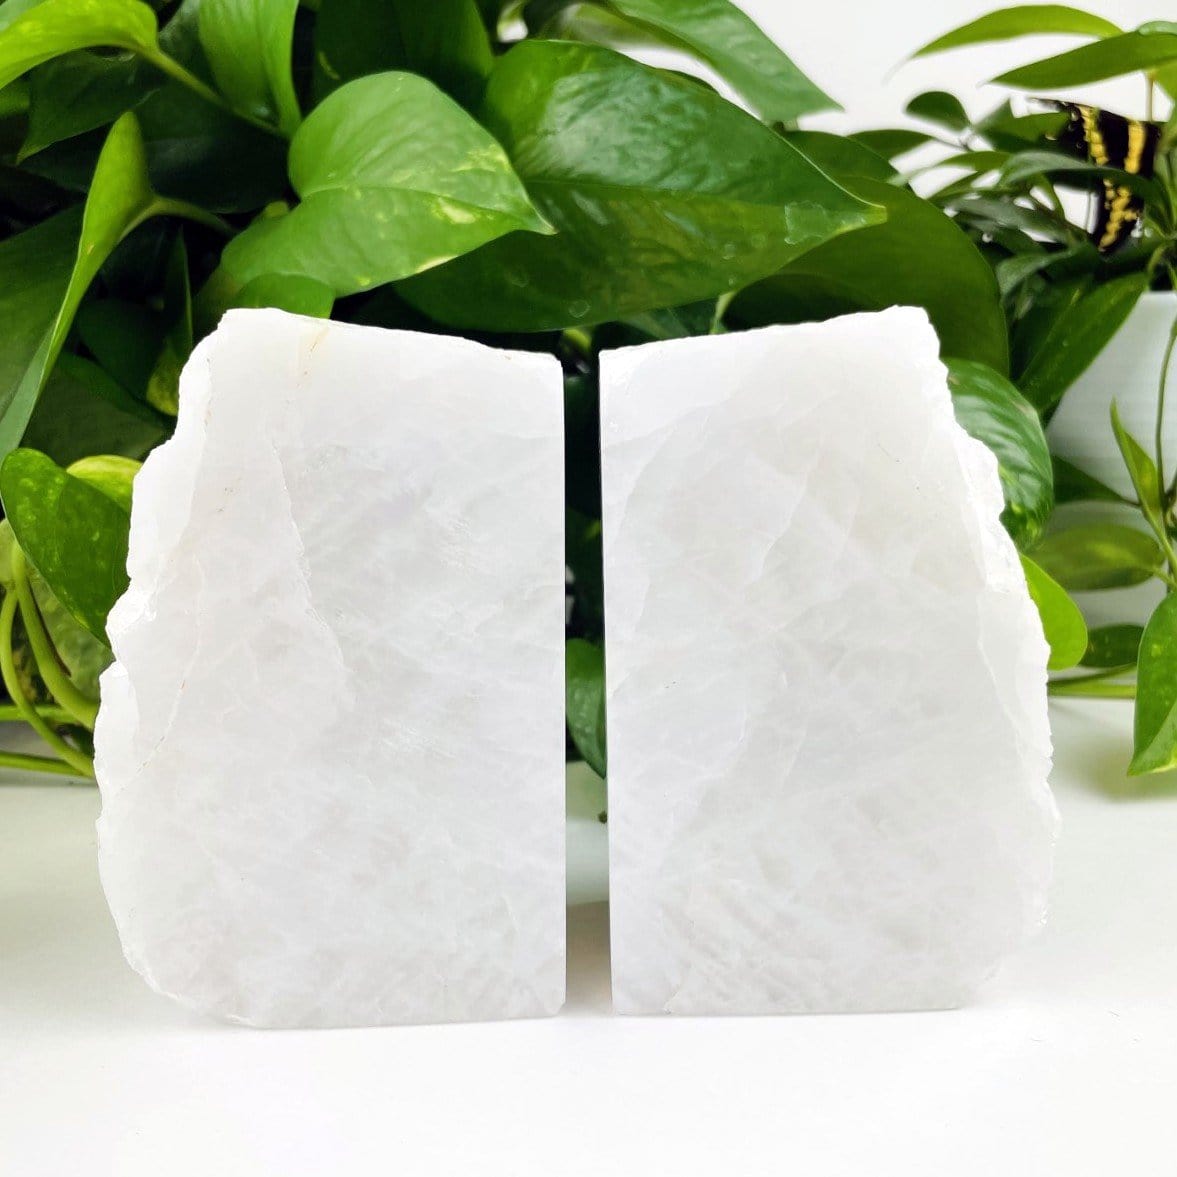 Crystal quartz bookend with a plant behind them.